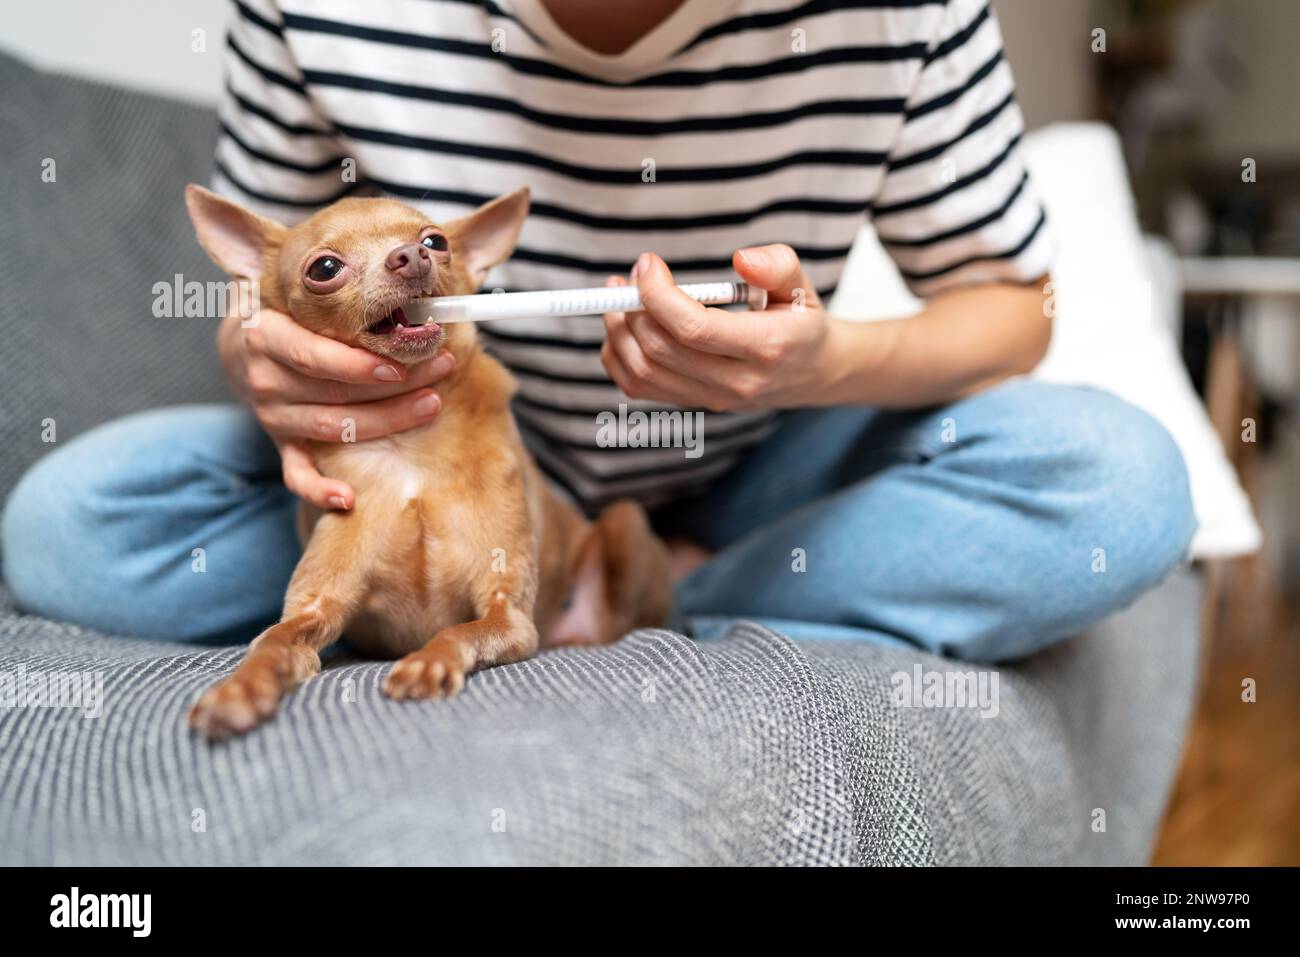 Pet owner giving medicine to her small dog using dispenser. Stock Photo